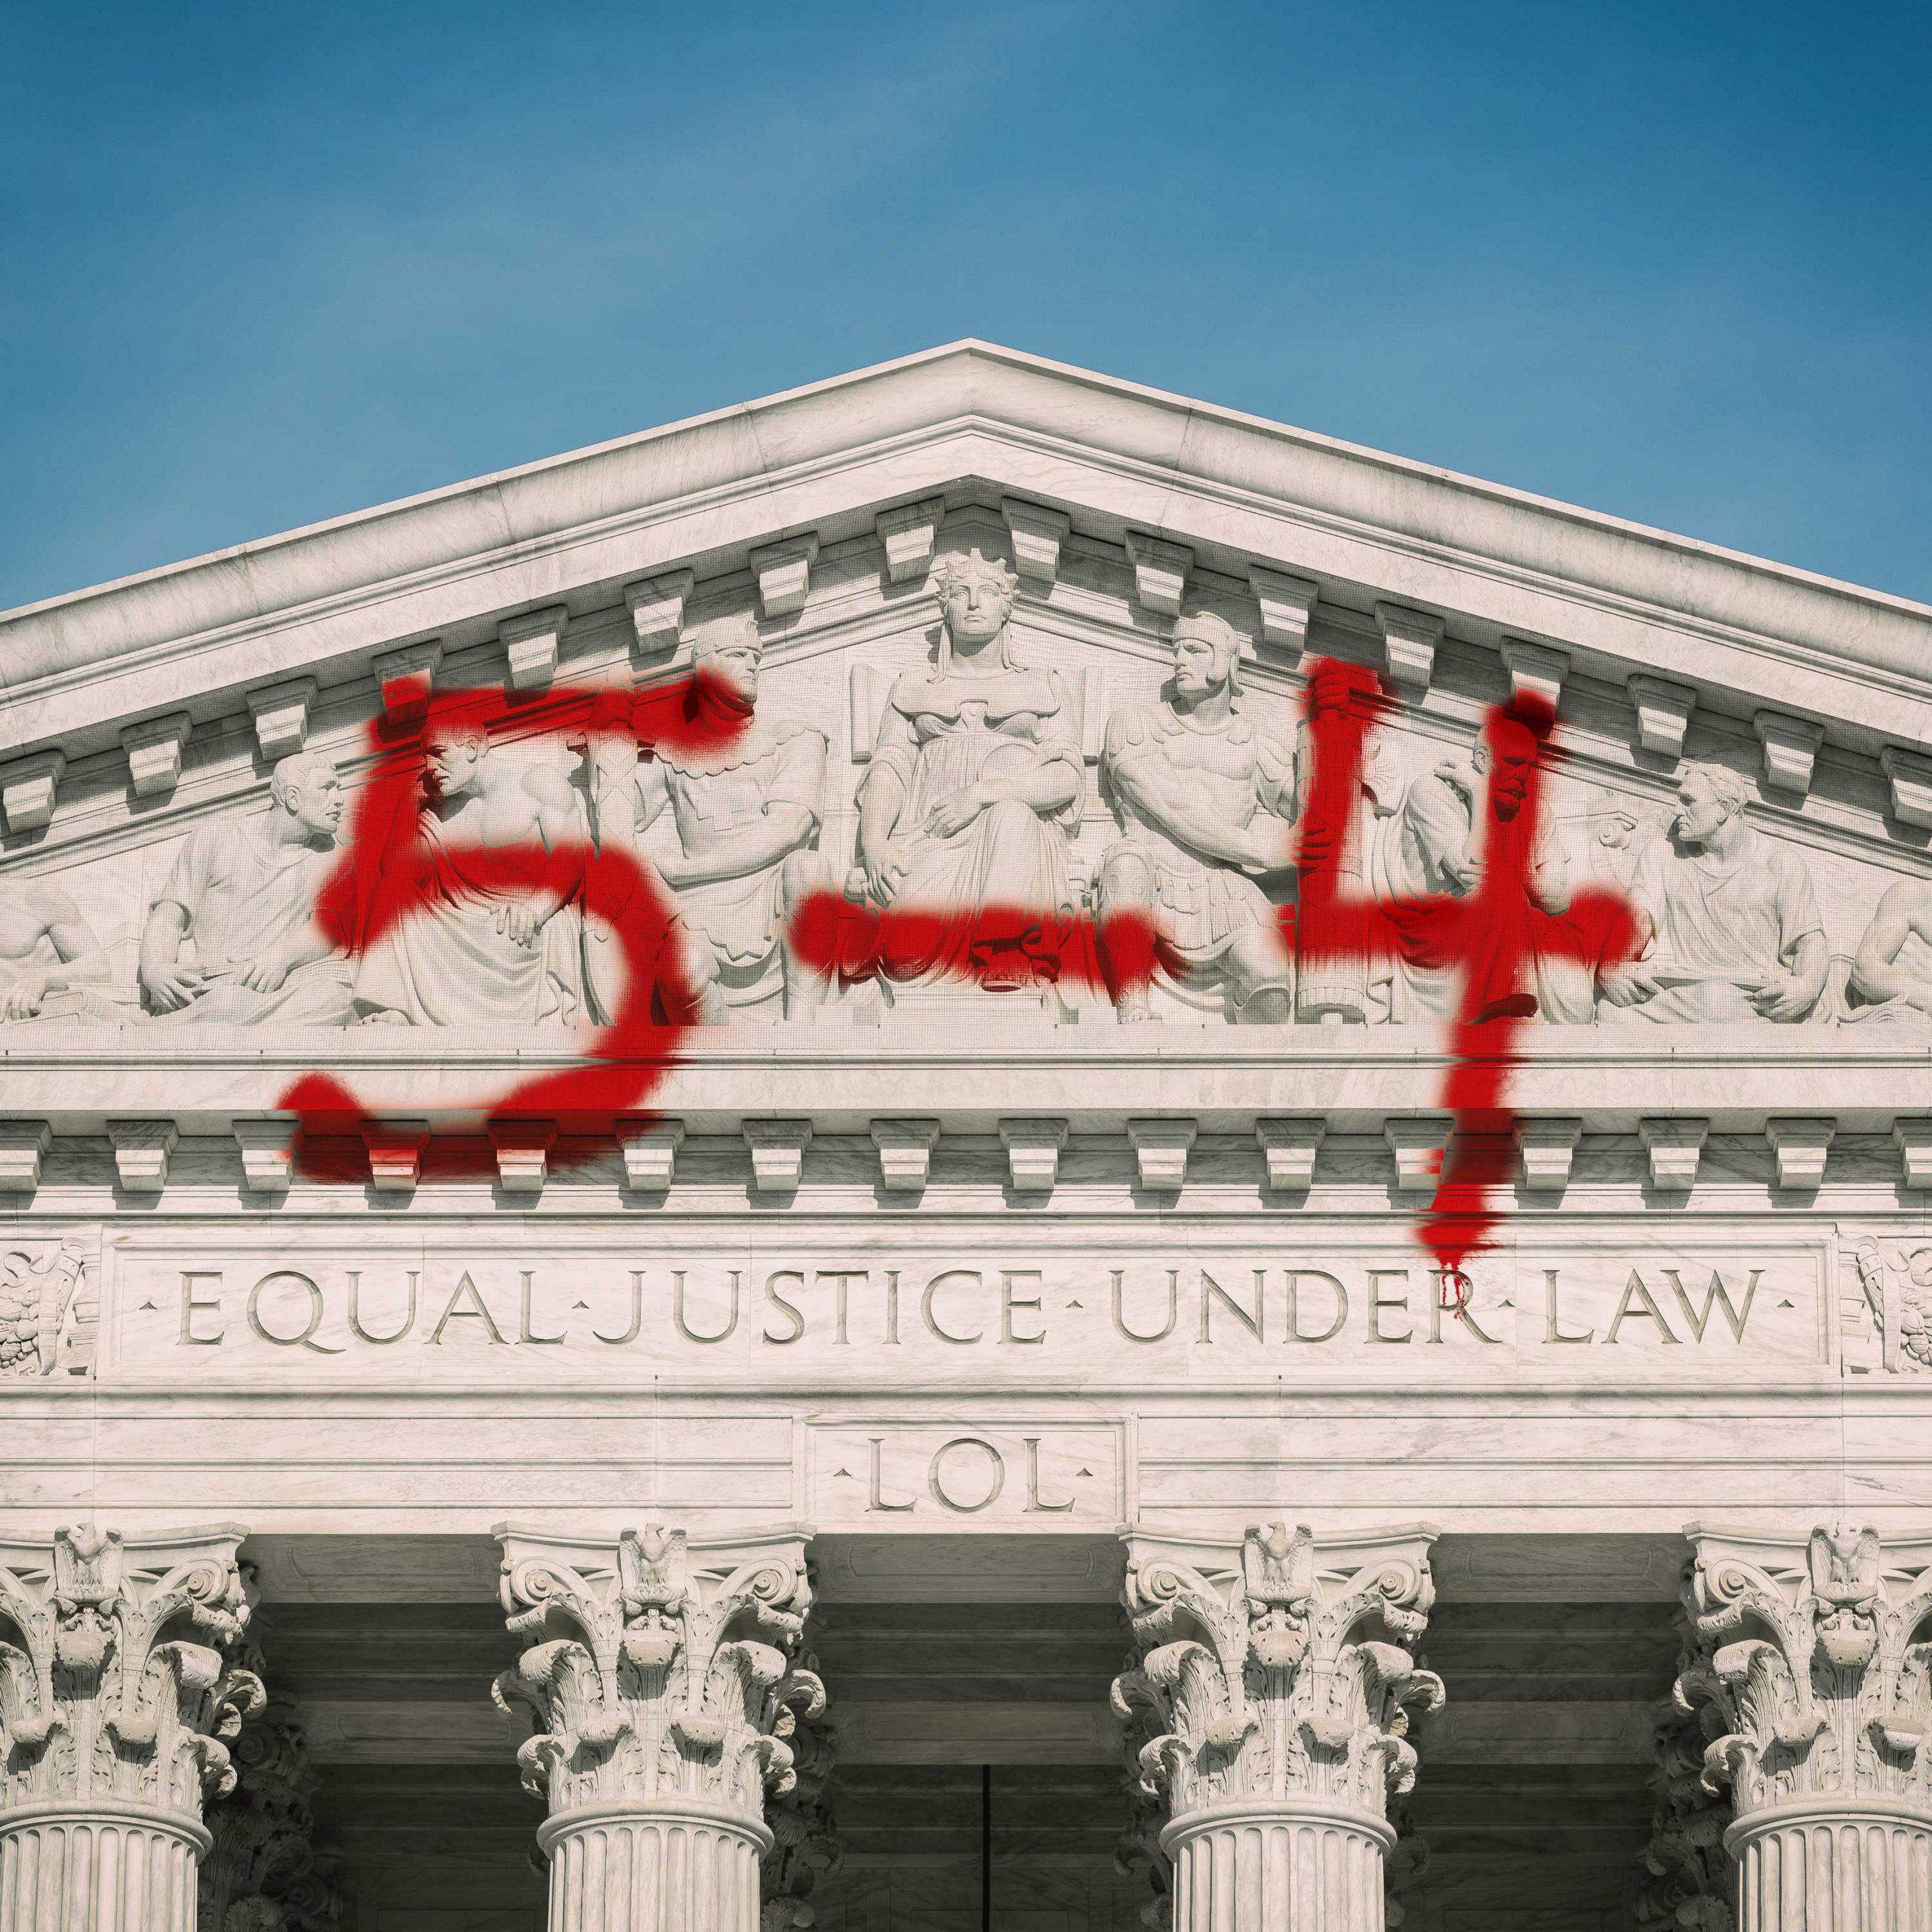 5-4, THE NEW PODCAST TAKING ON LEGALLY DUBIOUS SUPREME COURT DECISIONS, IS NOW AVAILABLE